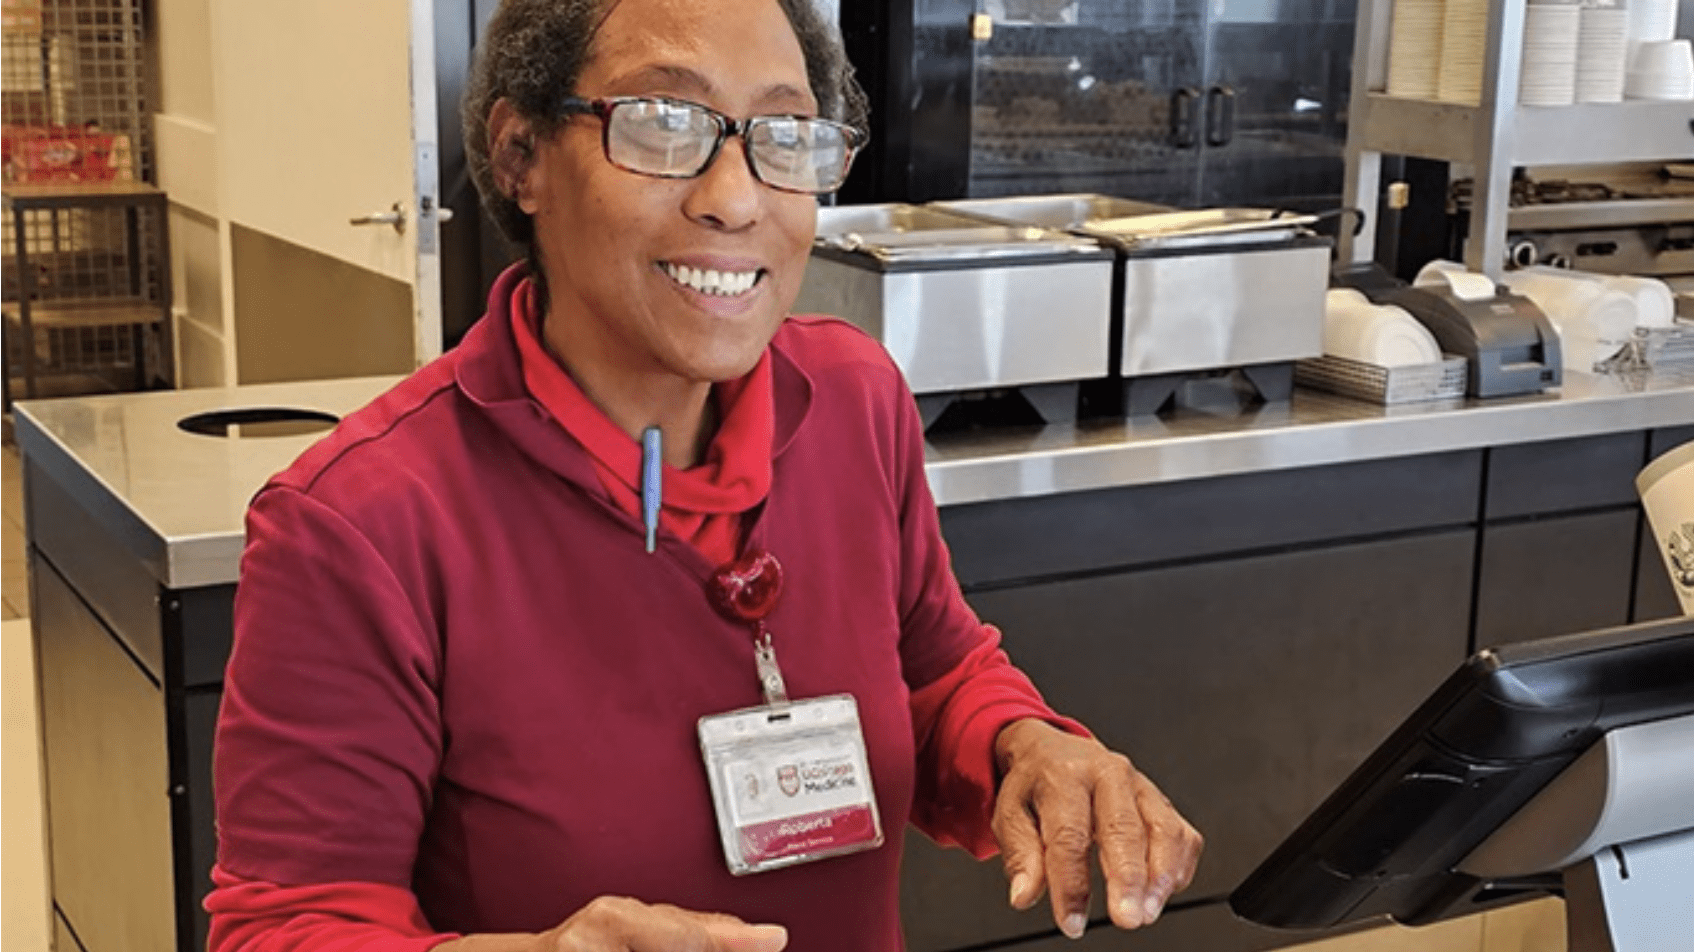 UChicago Medicine diners can round up food purchases to support hospital food pantries